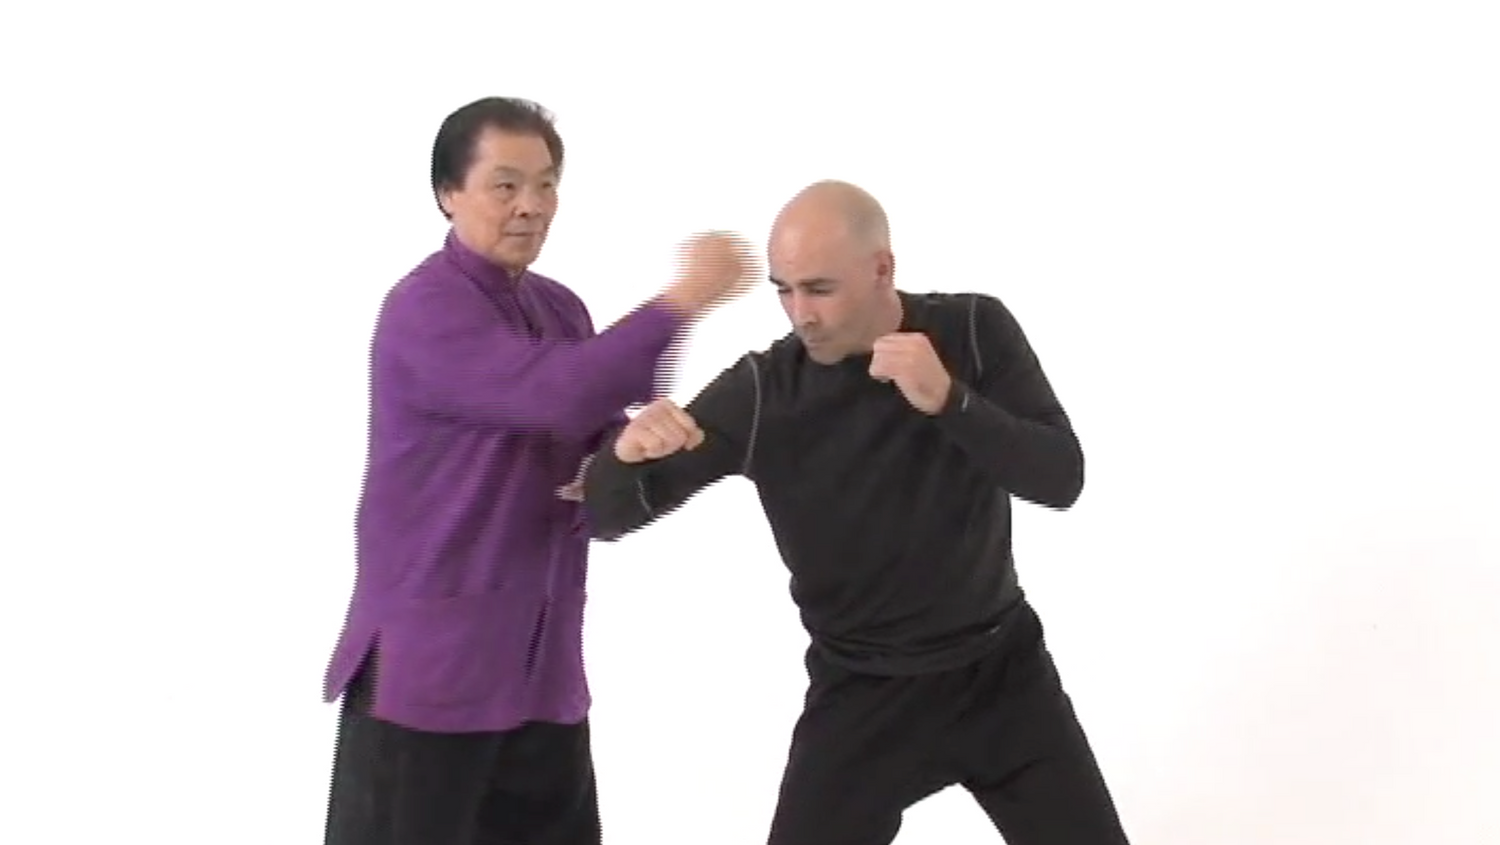 Street Fighting Applications of Wing Chun DVD 3: Muay Thai Melee by William Cheung (Preowned) - Budovideos Inc